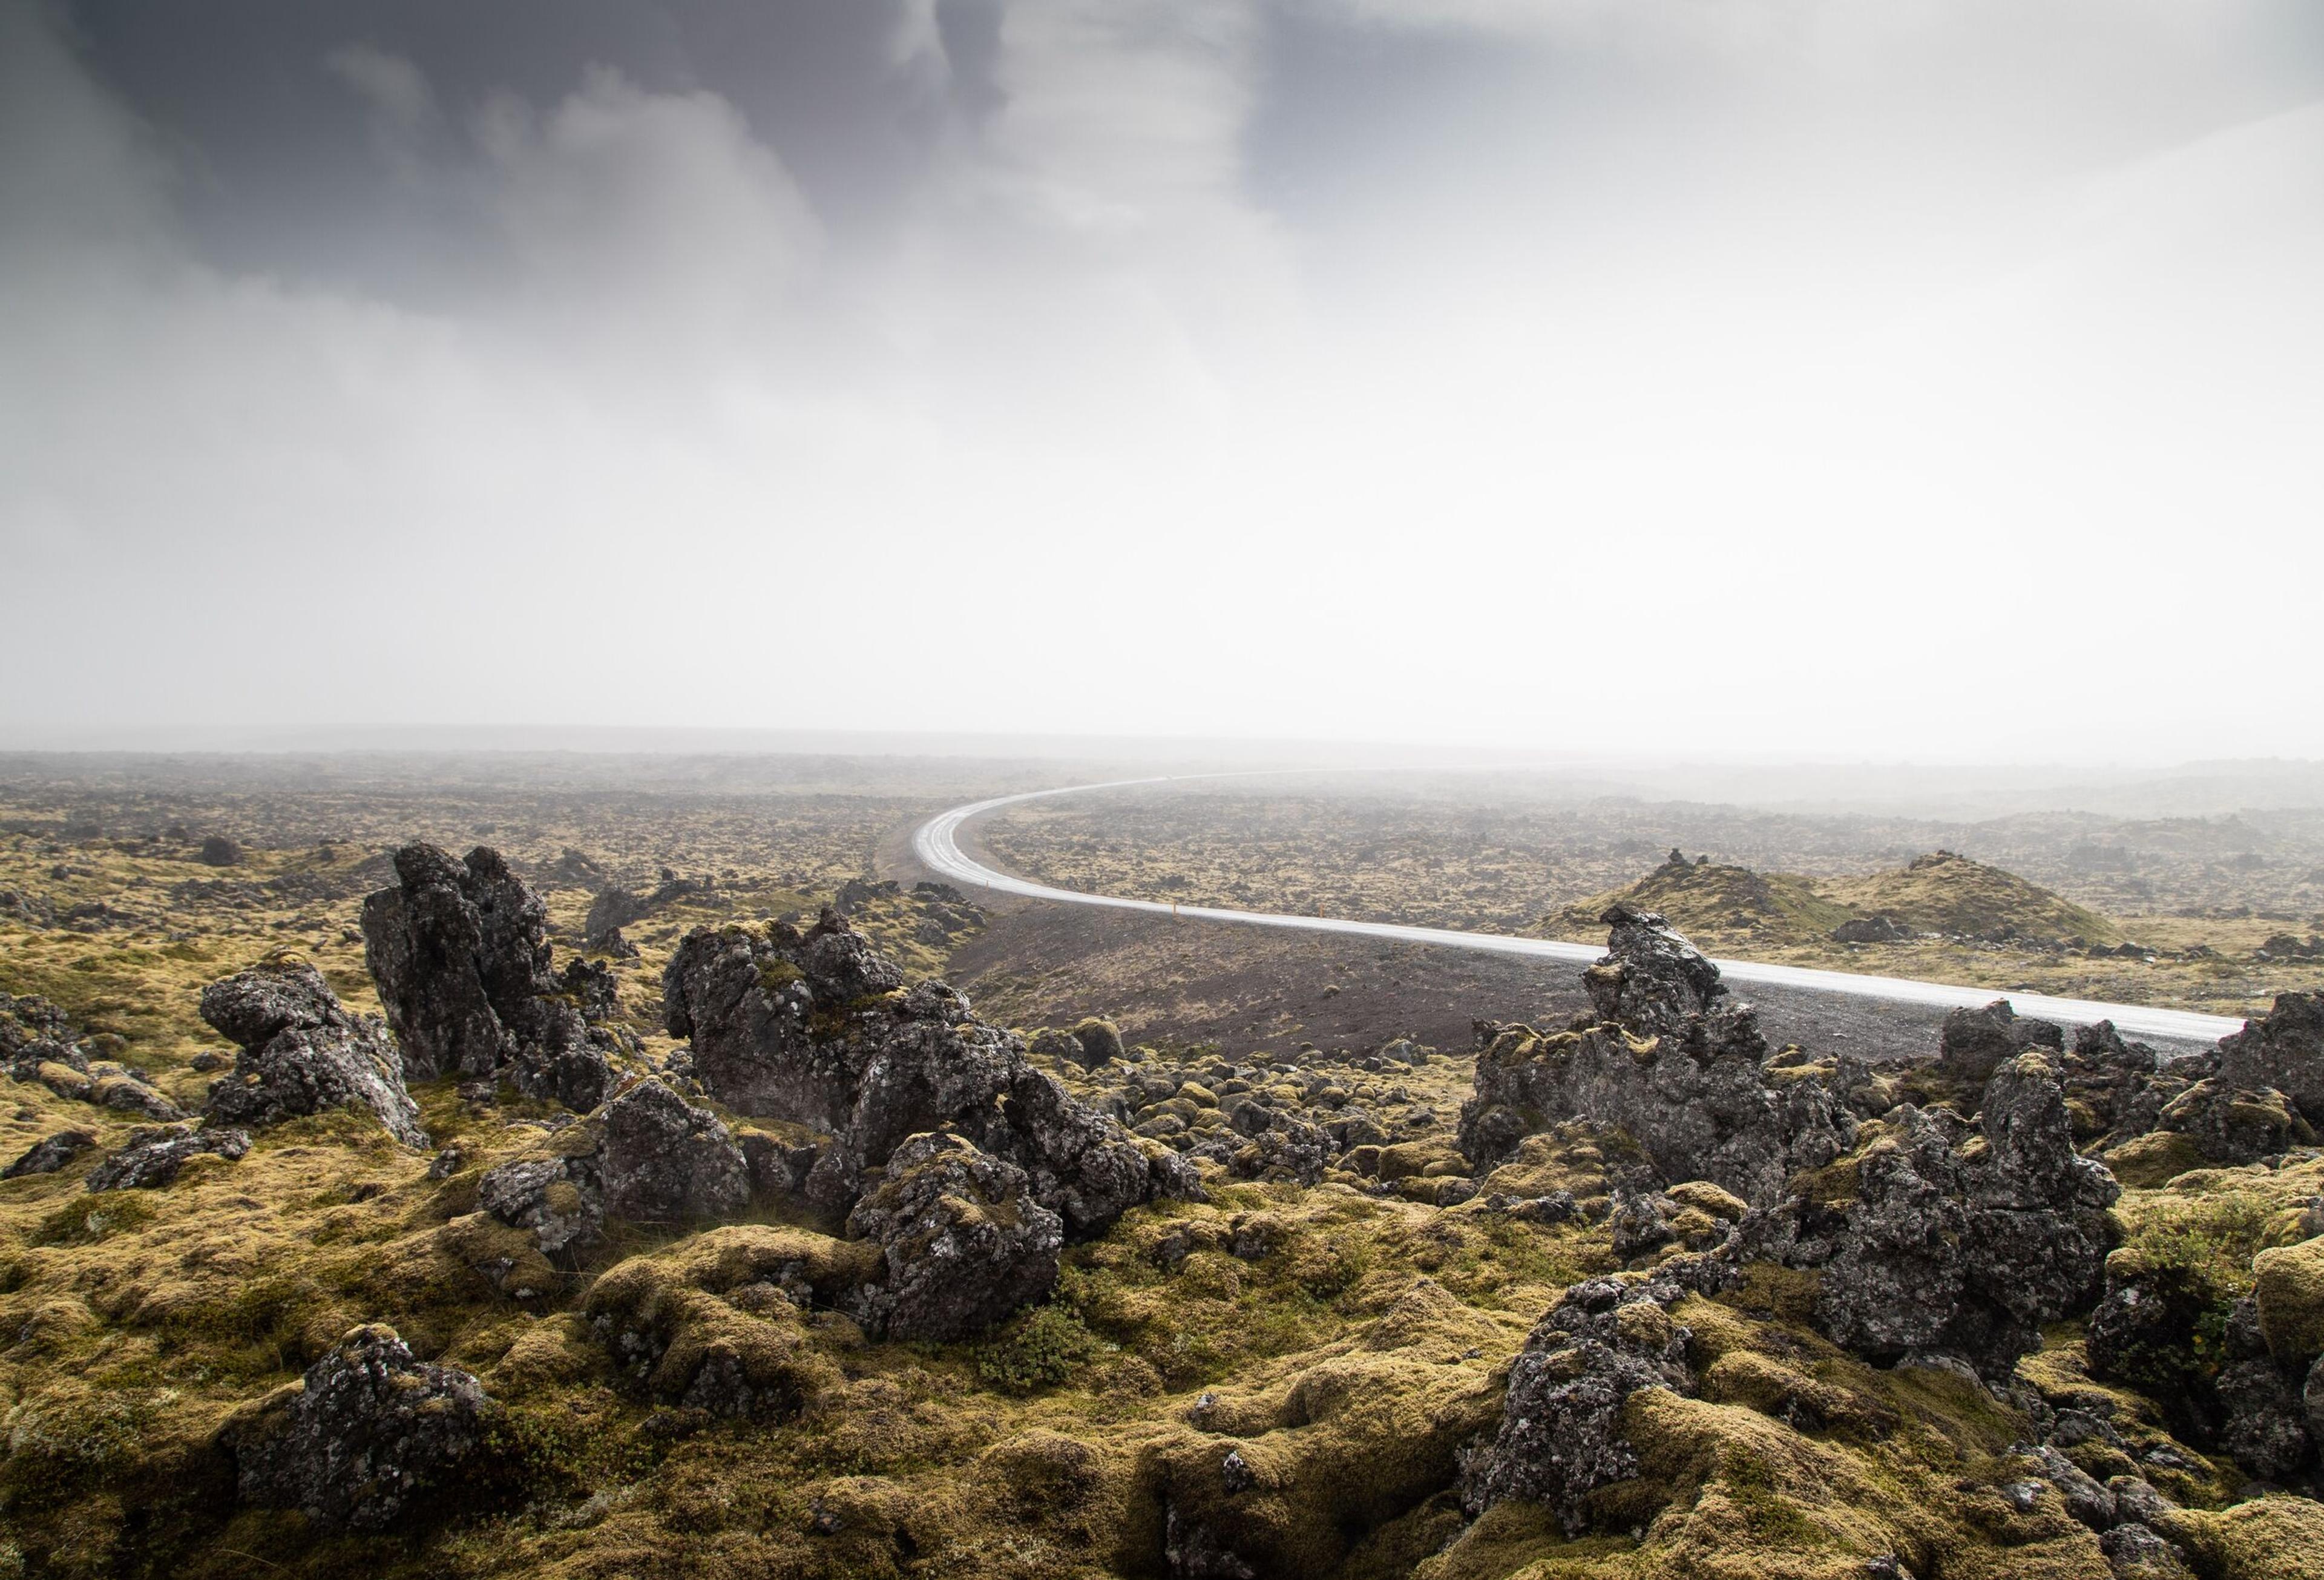 A curving road cuts through a stark, rocky landscape covered in moss, under a misty and overcast sky.